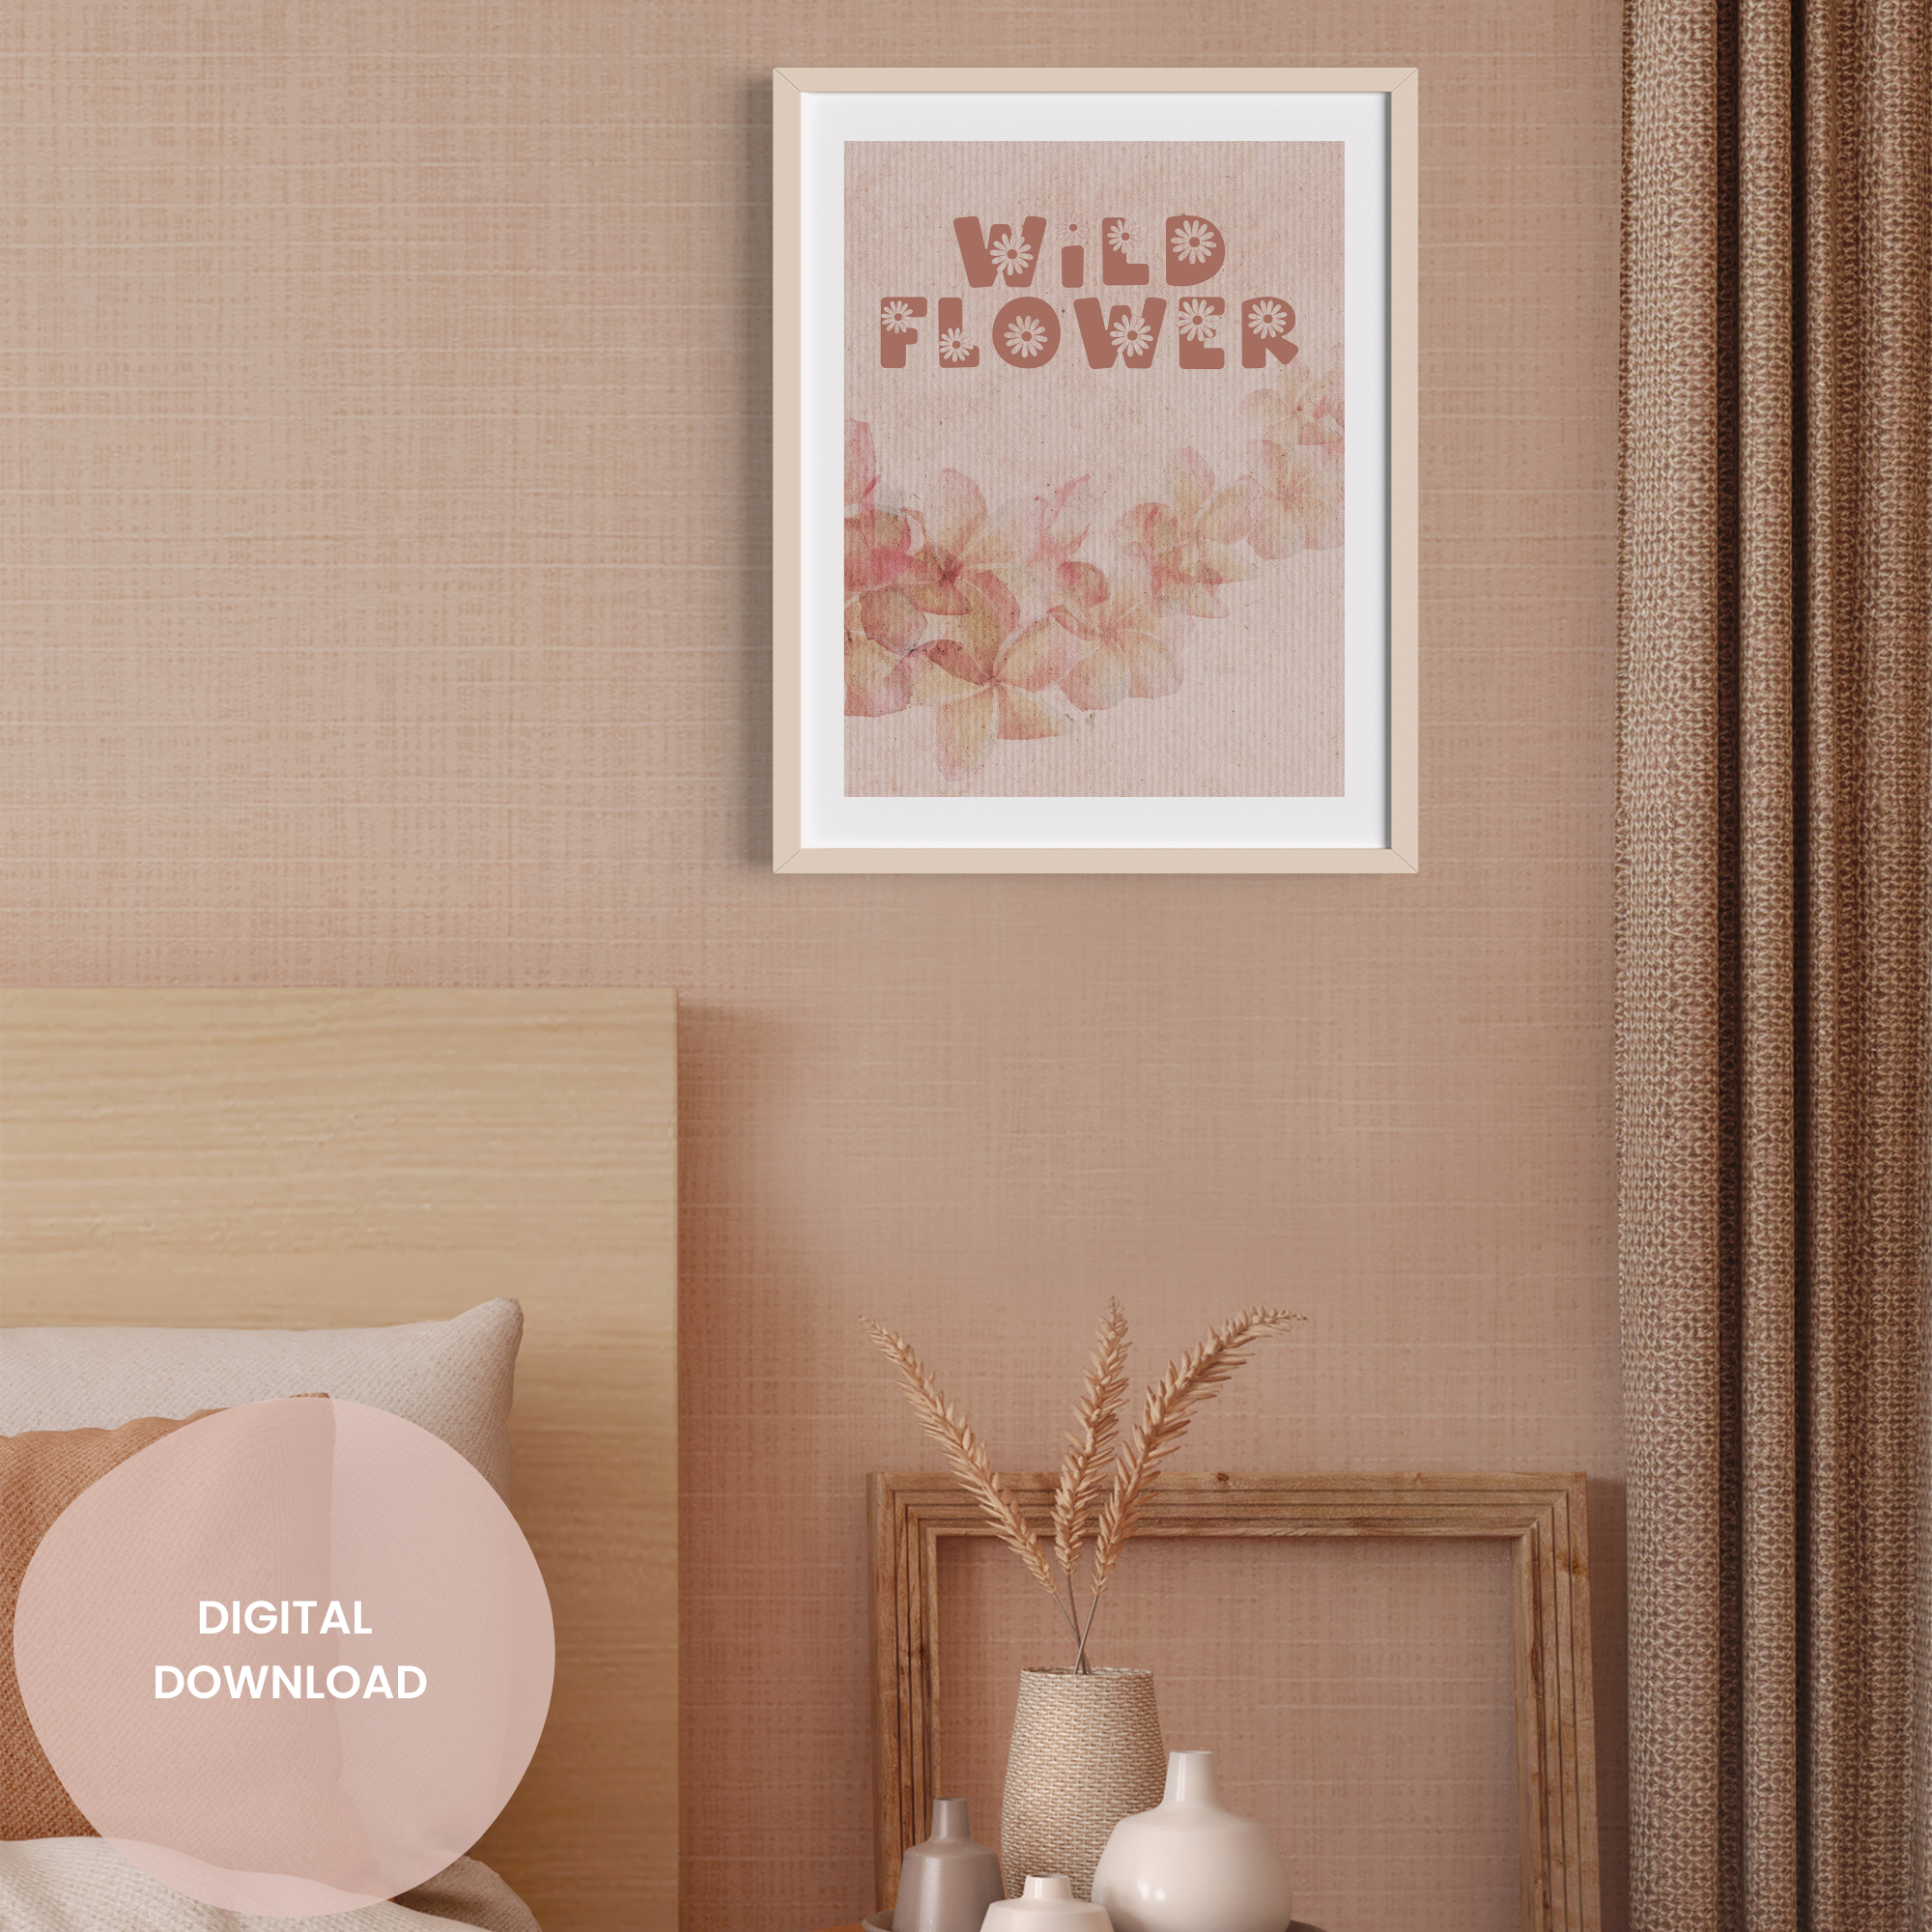 Wild Flower Wall Collage Poster - Whimsical Graphic for Artful Decor